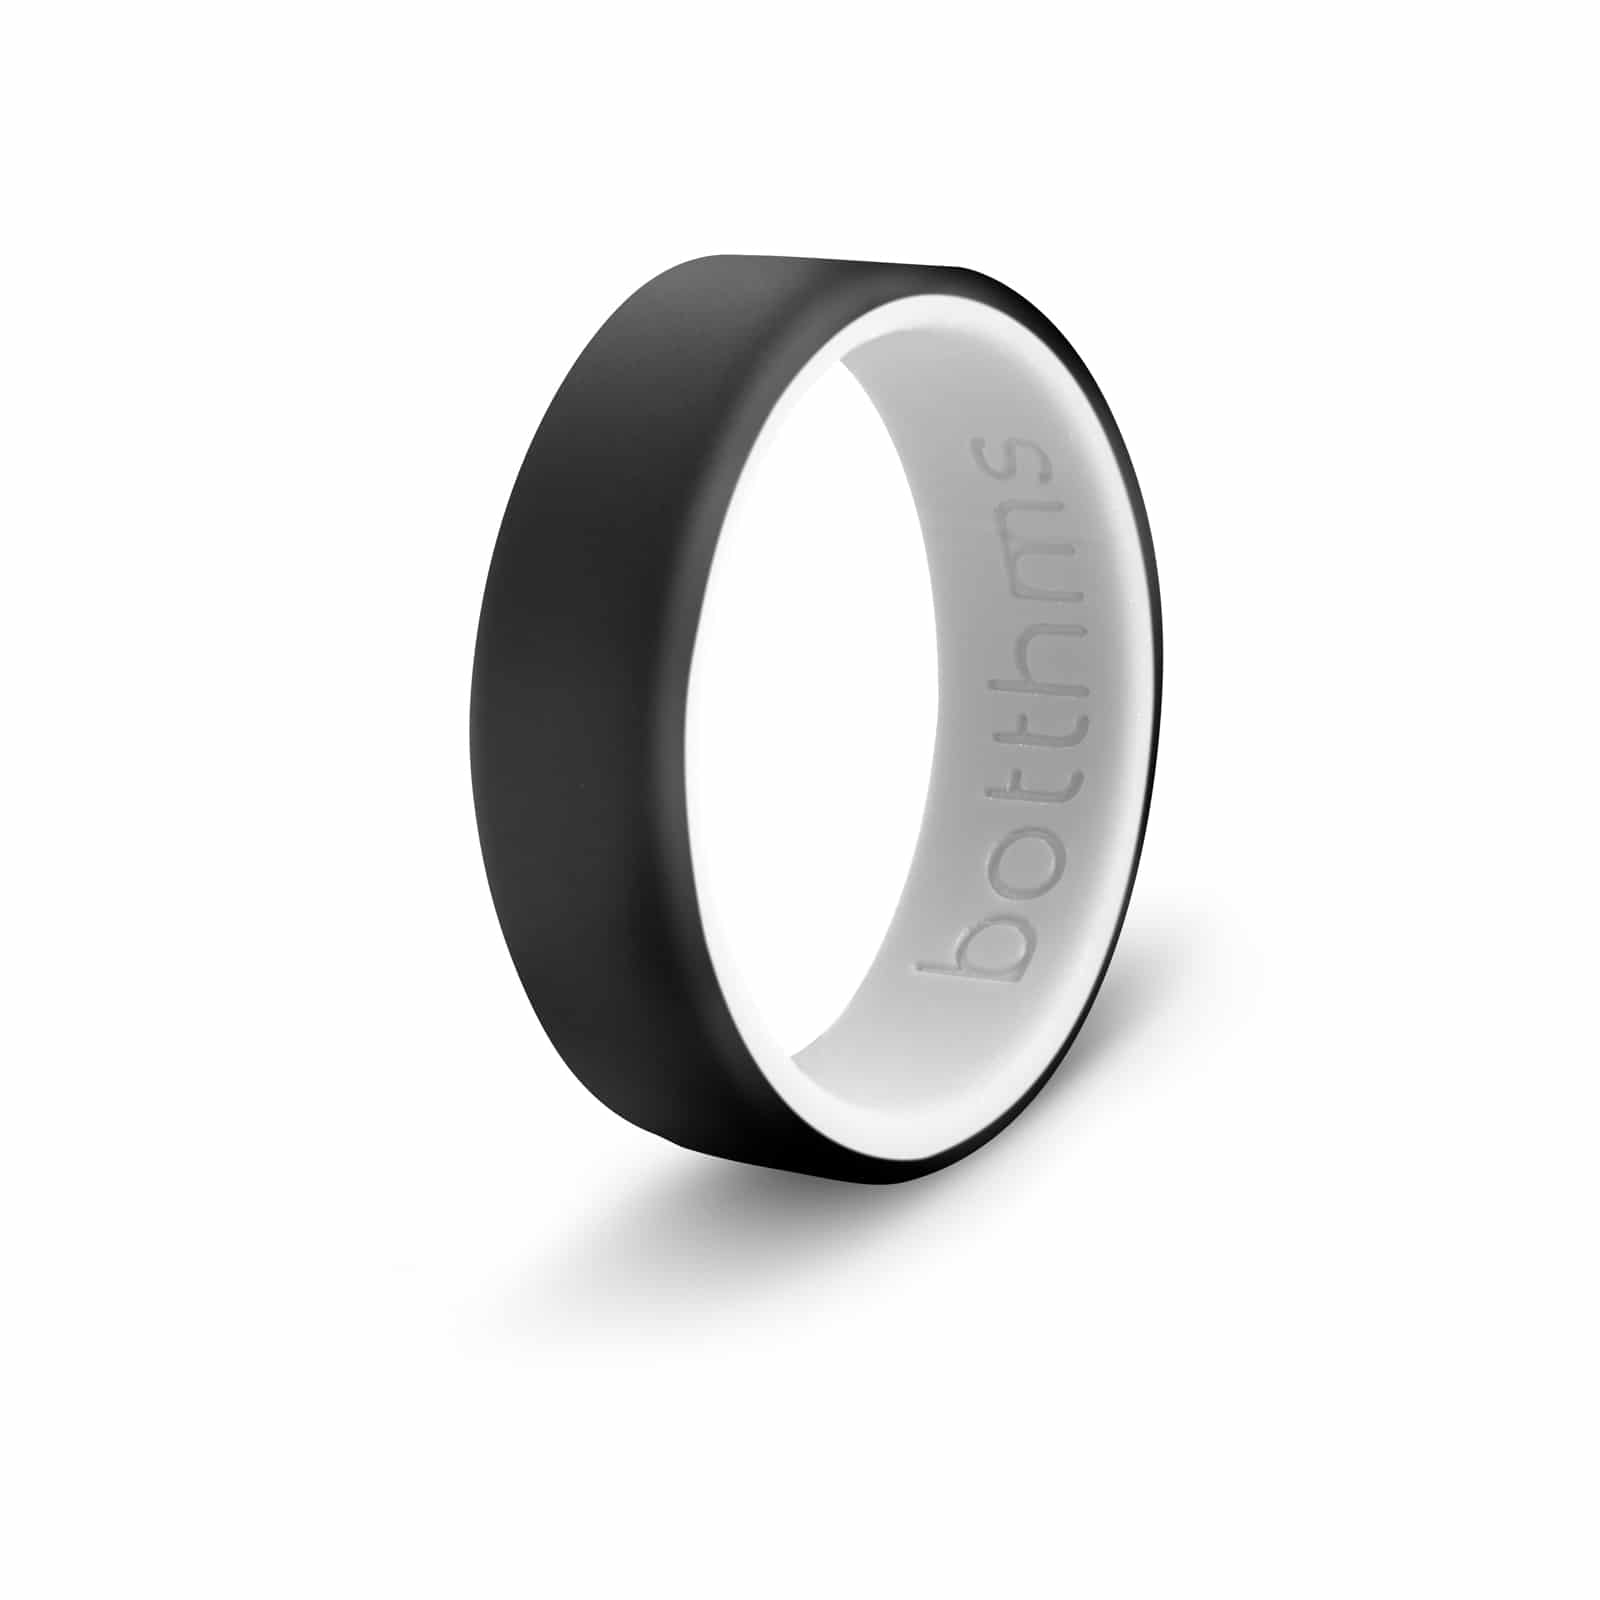 botthms botthms Double Black Silicone Ring Silicone Rings